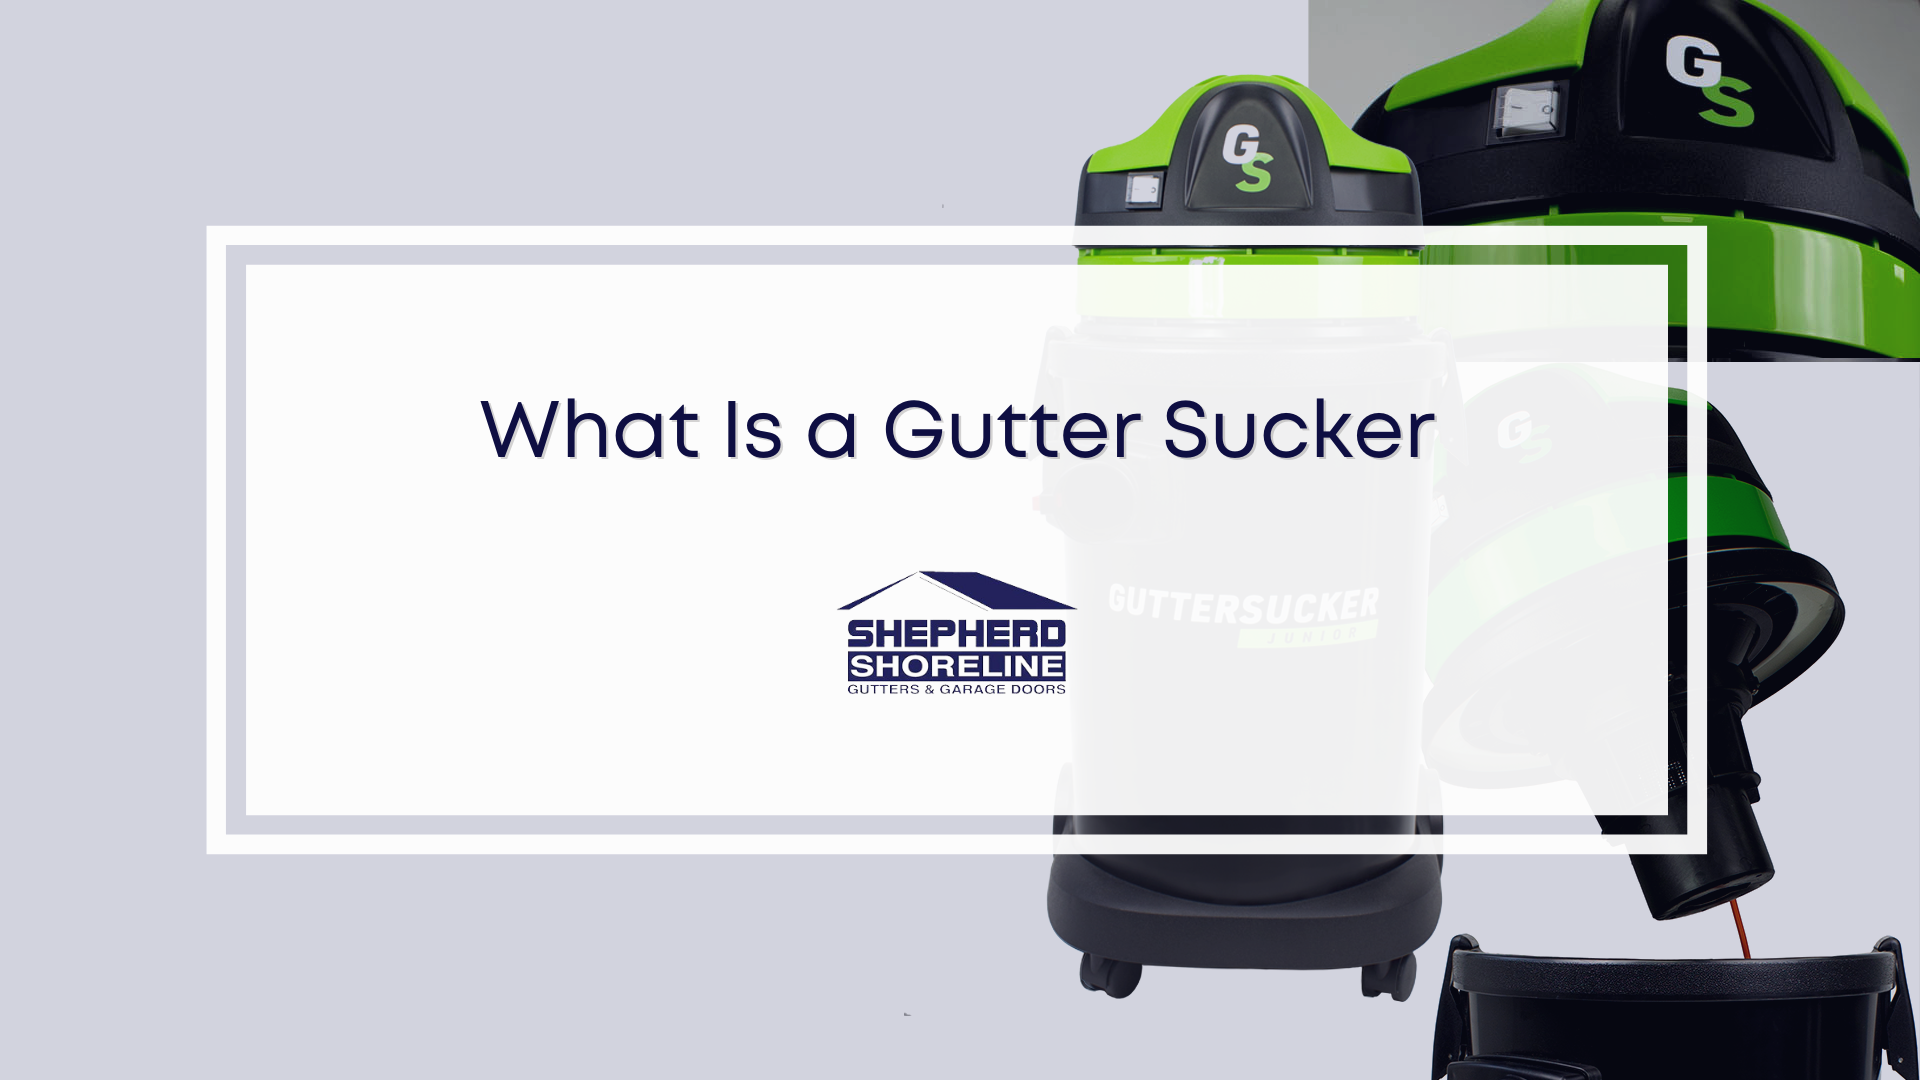 Featured image of what is a gutter sucker